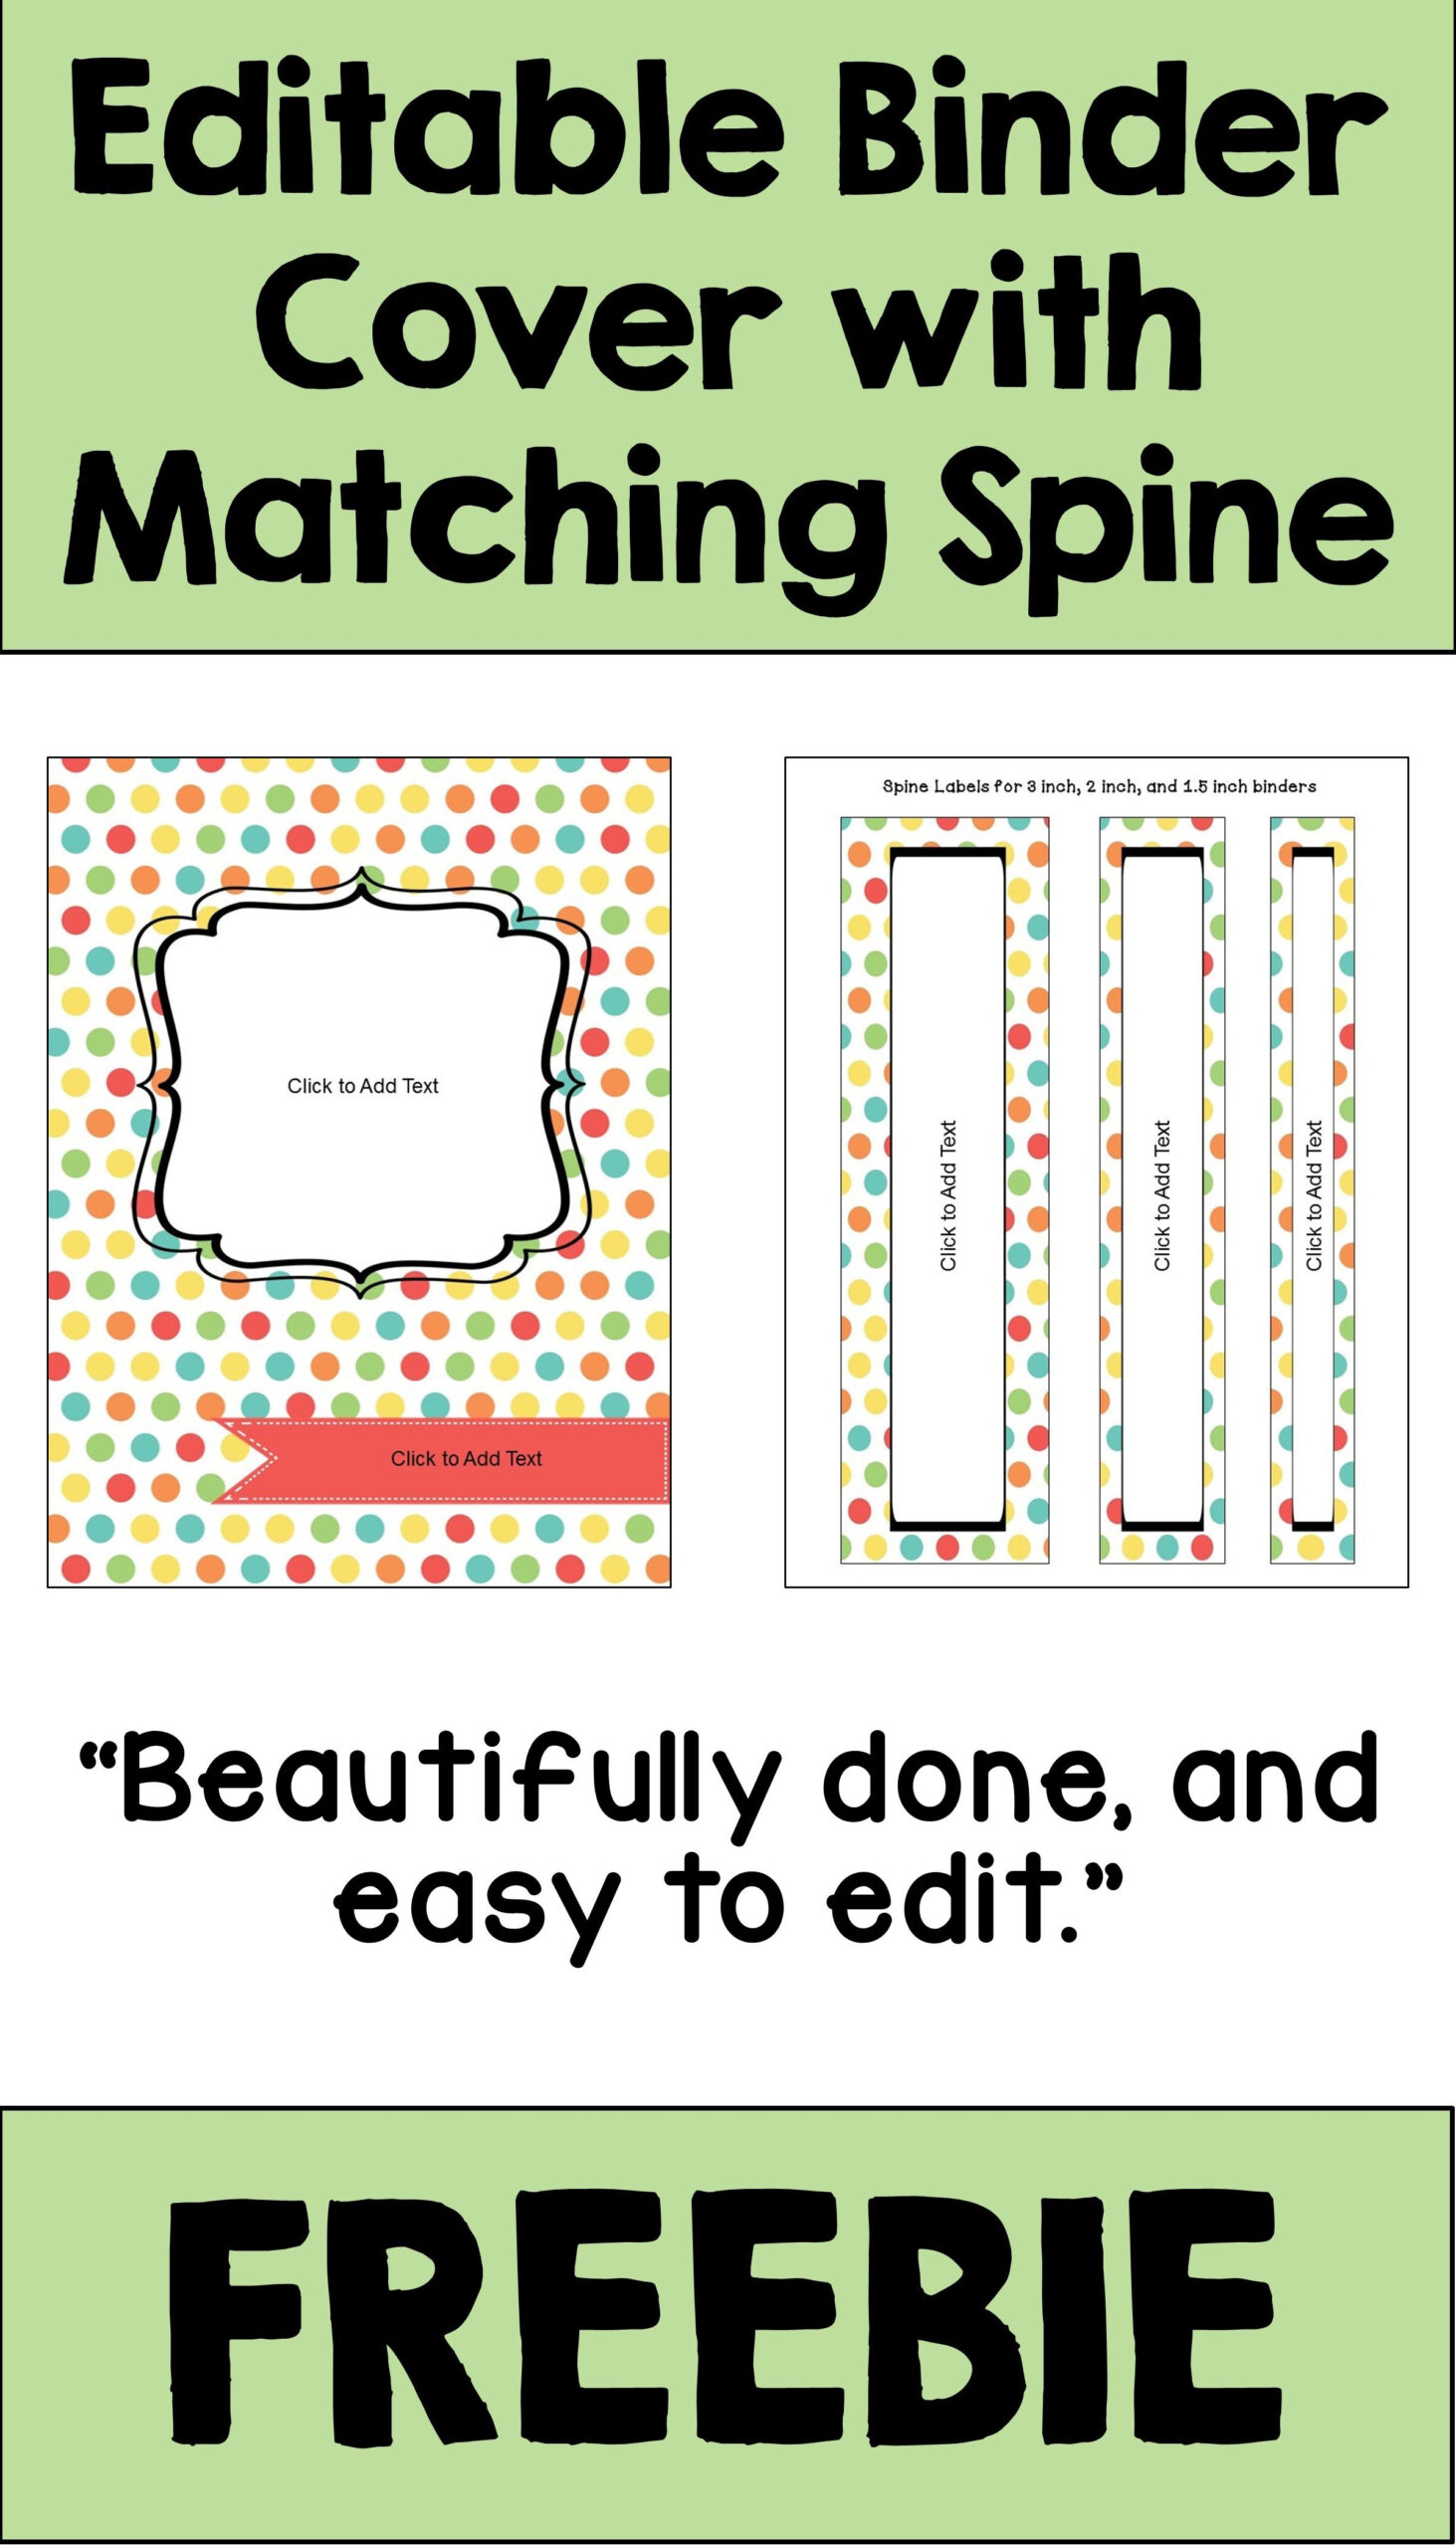 This Free Editable Binder Cover And Spine Is A Printable Template throughout Free Editable Printable Binder Covers And Spines